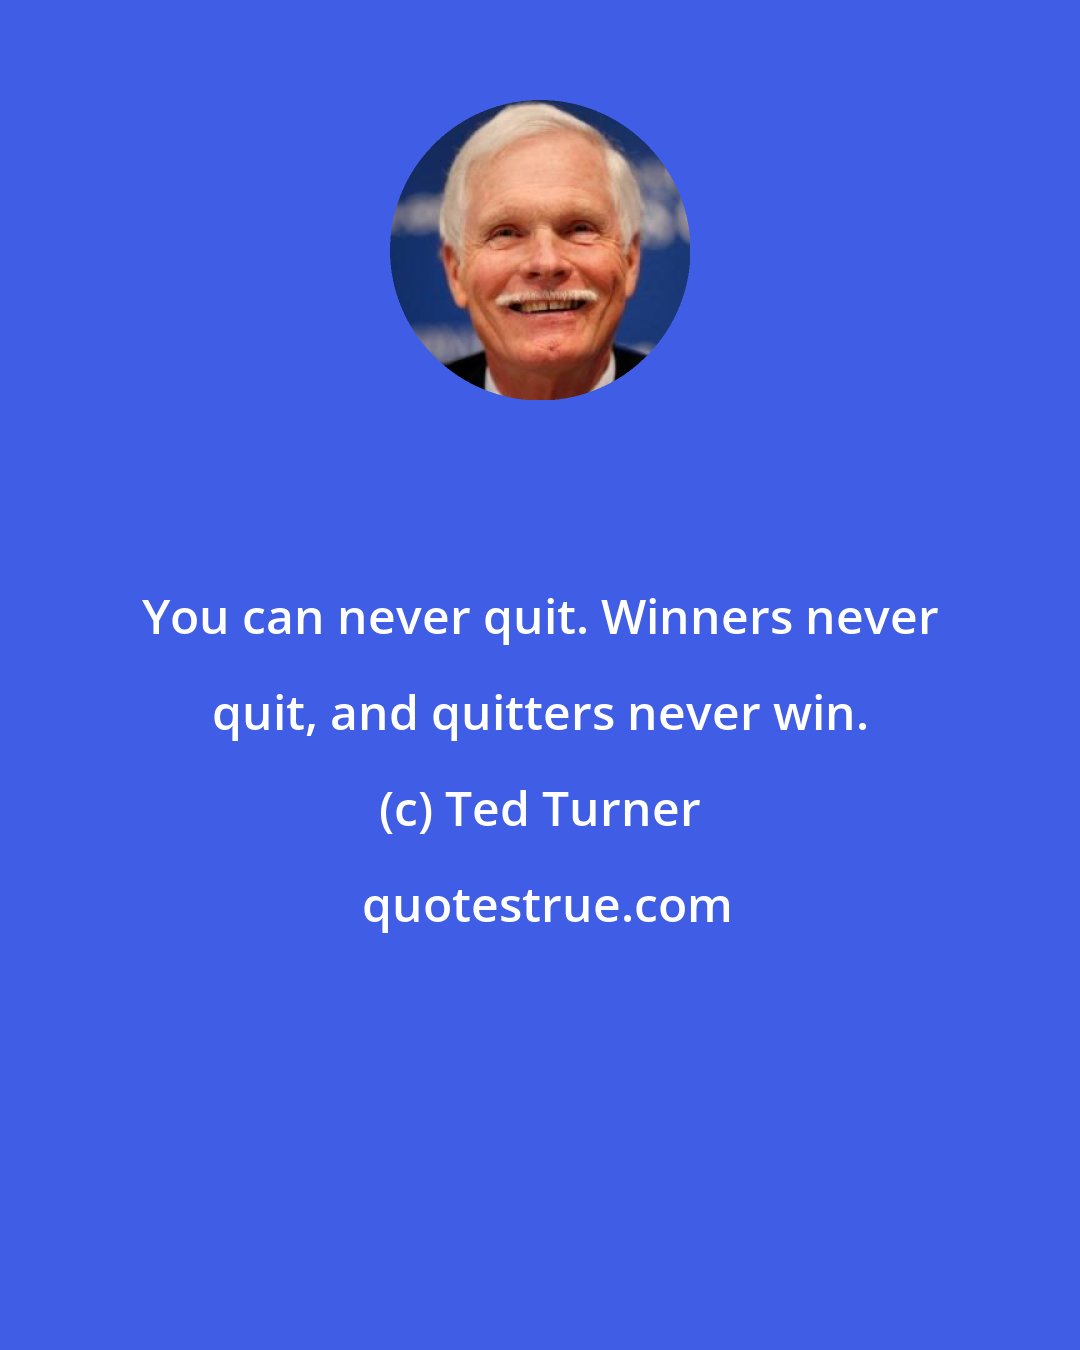 Ted Turner: You can never quit. Winners never quit, and quitters never win.